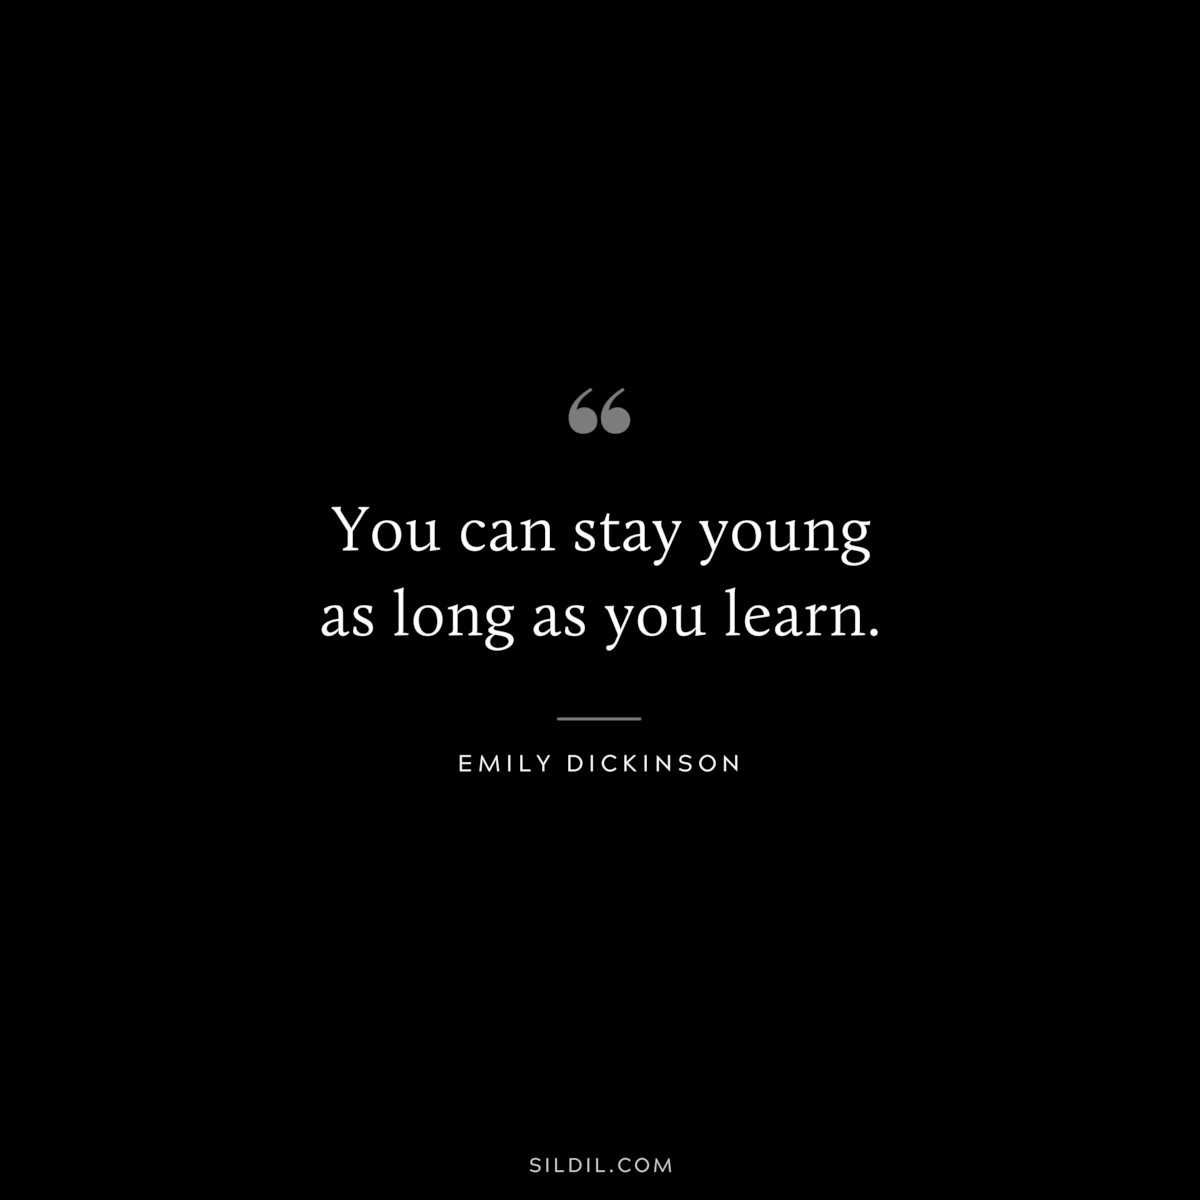 You can stay young as long as you learn.